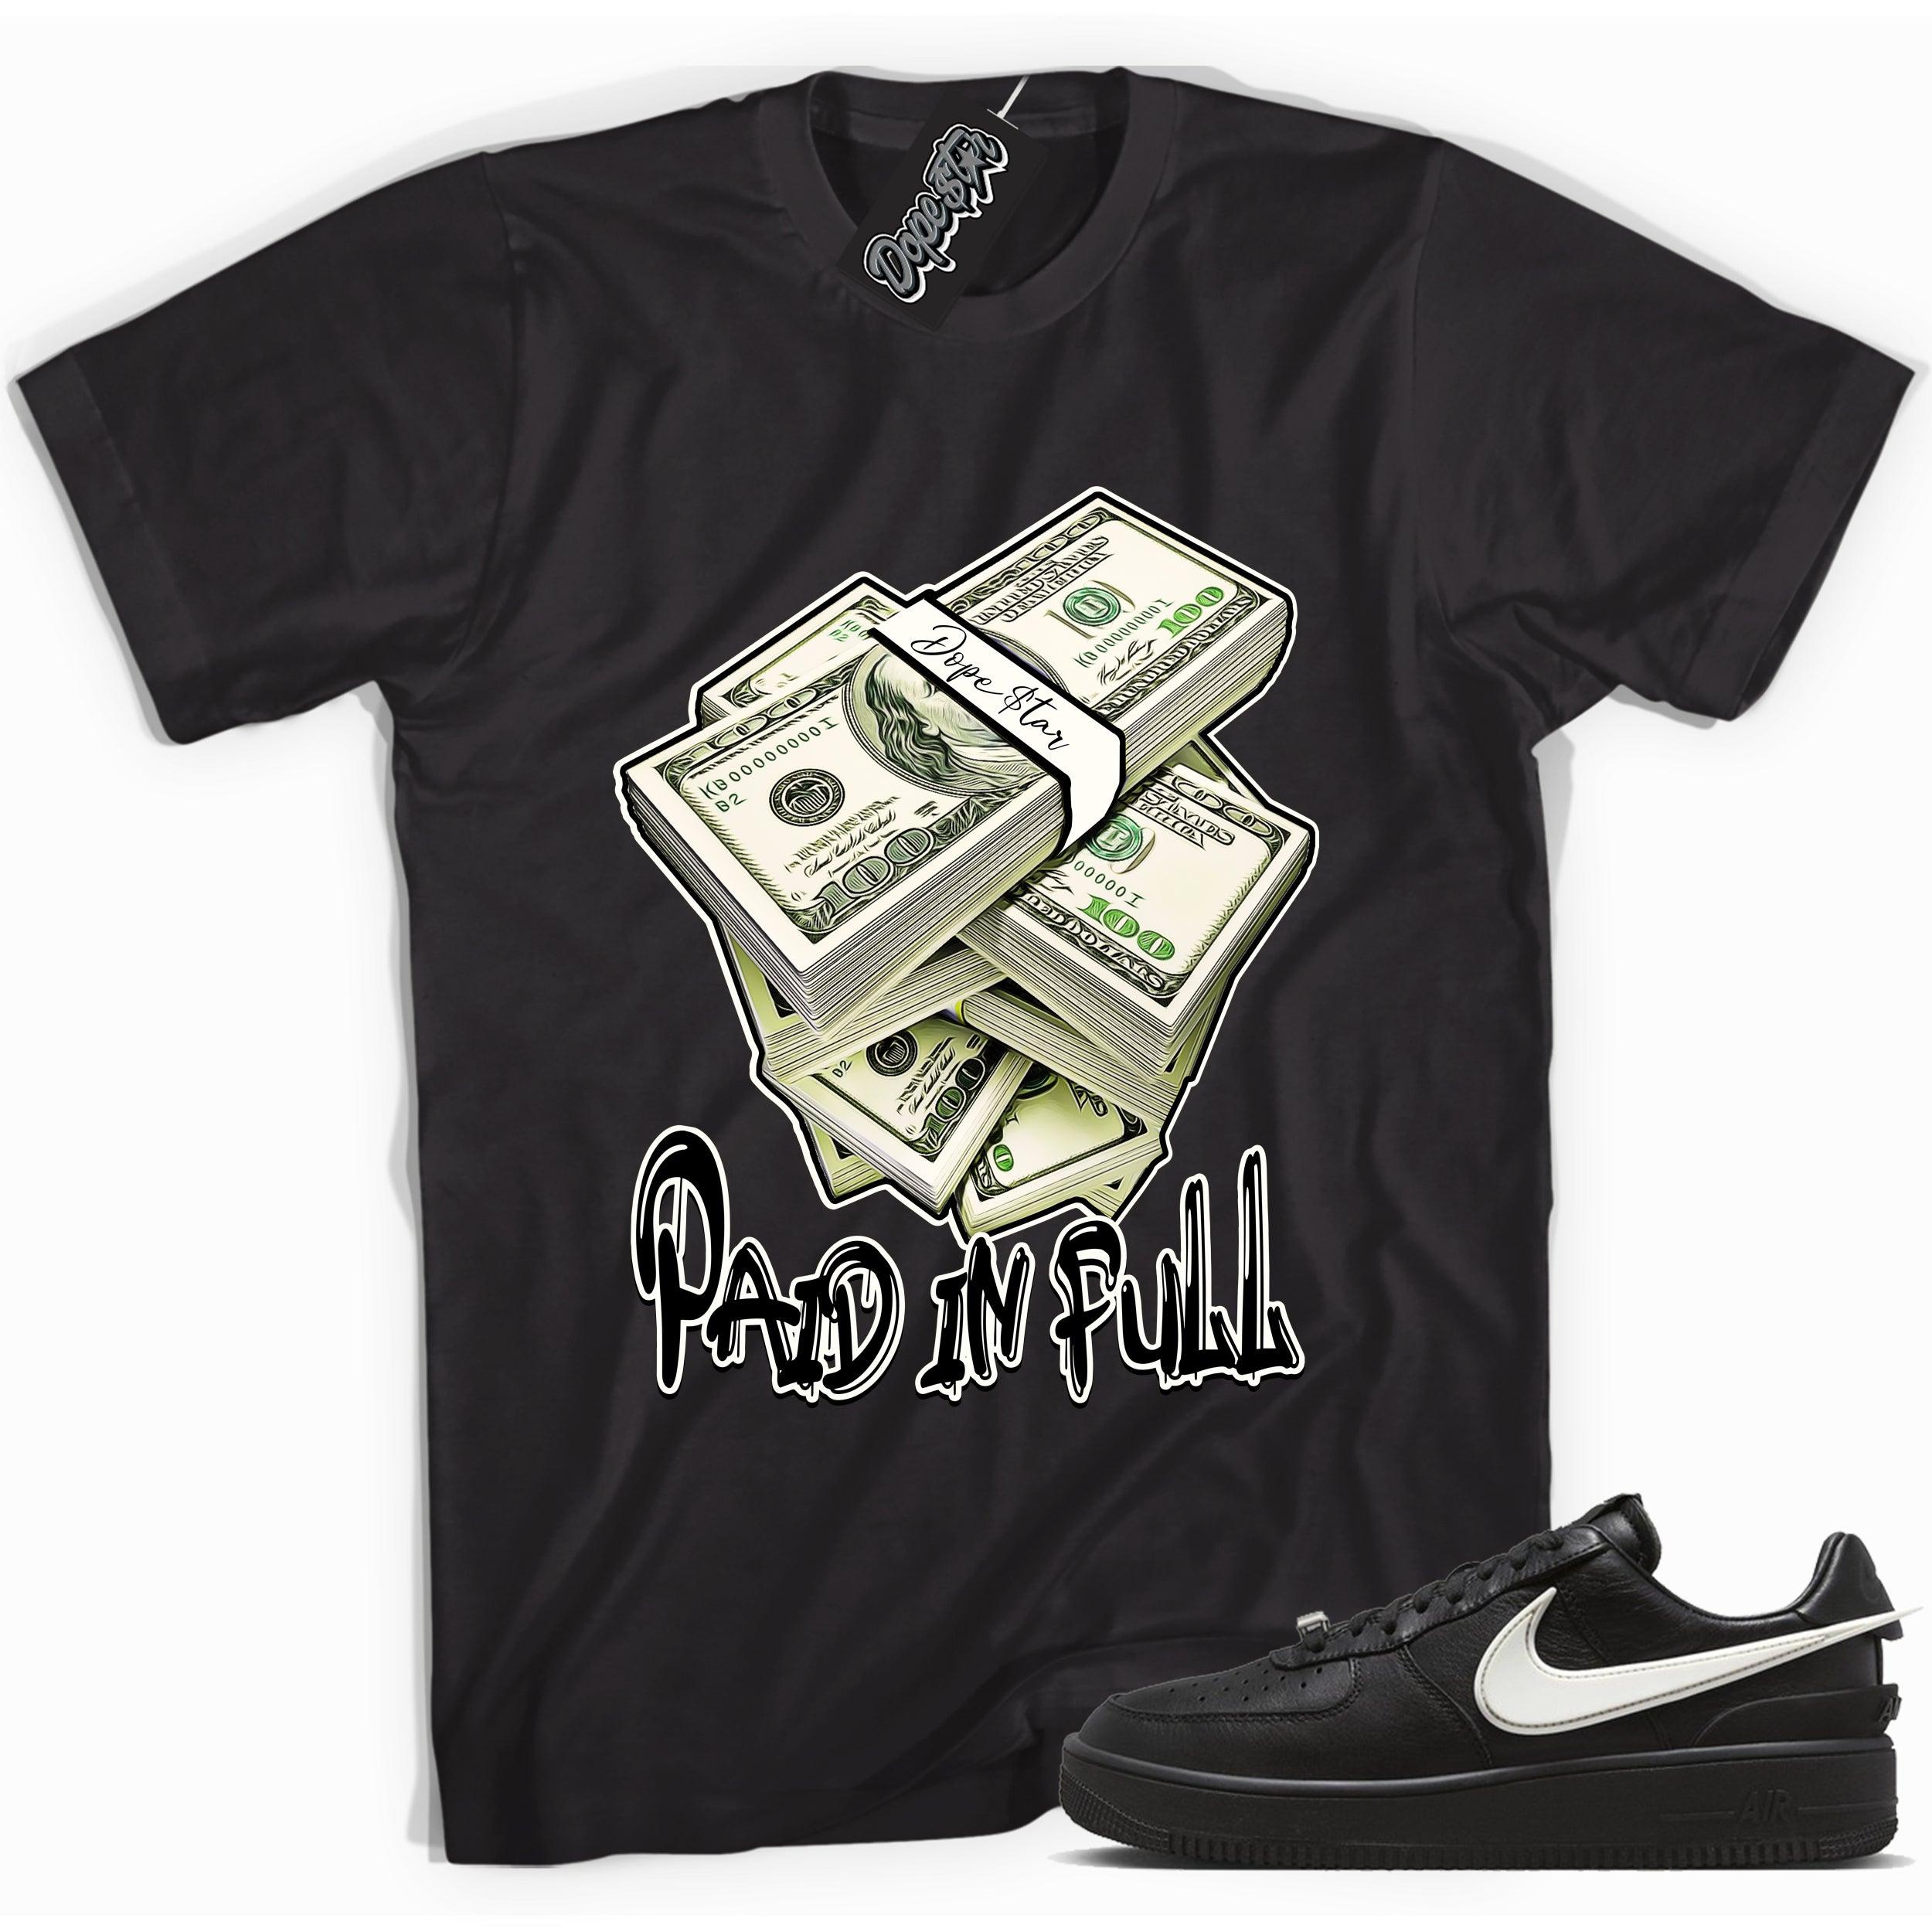 Cool black graphic tee with 'paid in full' print, that perfectly matches Nike Air Force 1 Low SP Ambush Phantom sneakers.